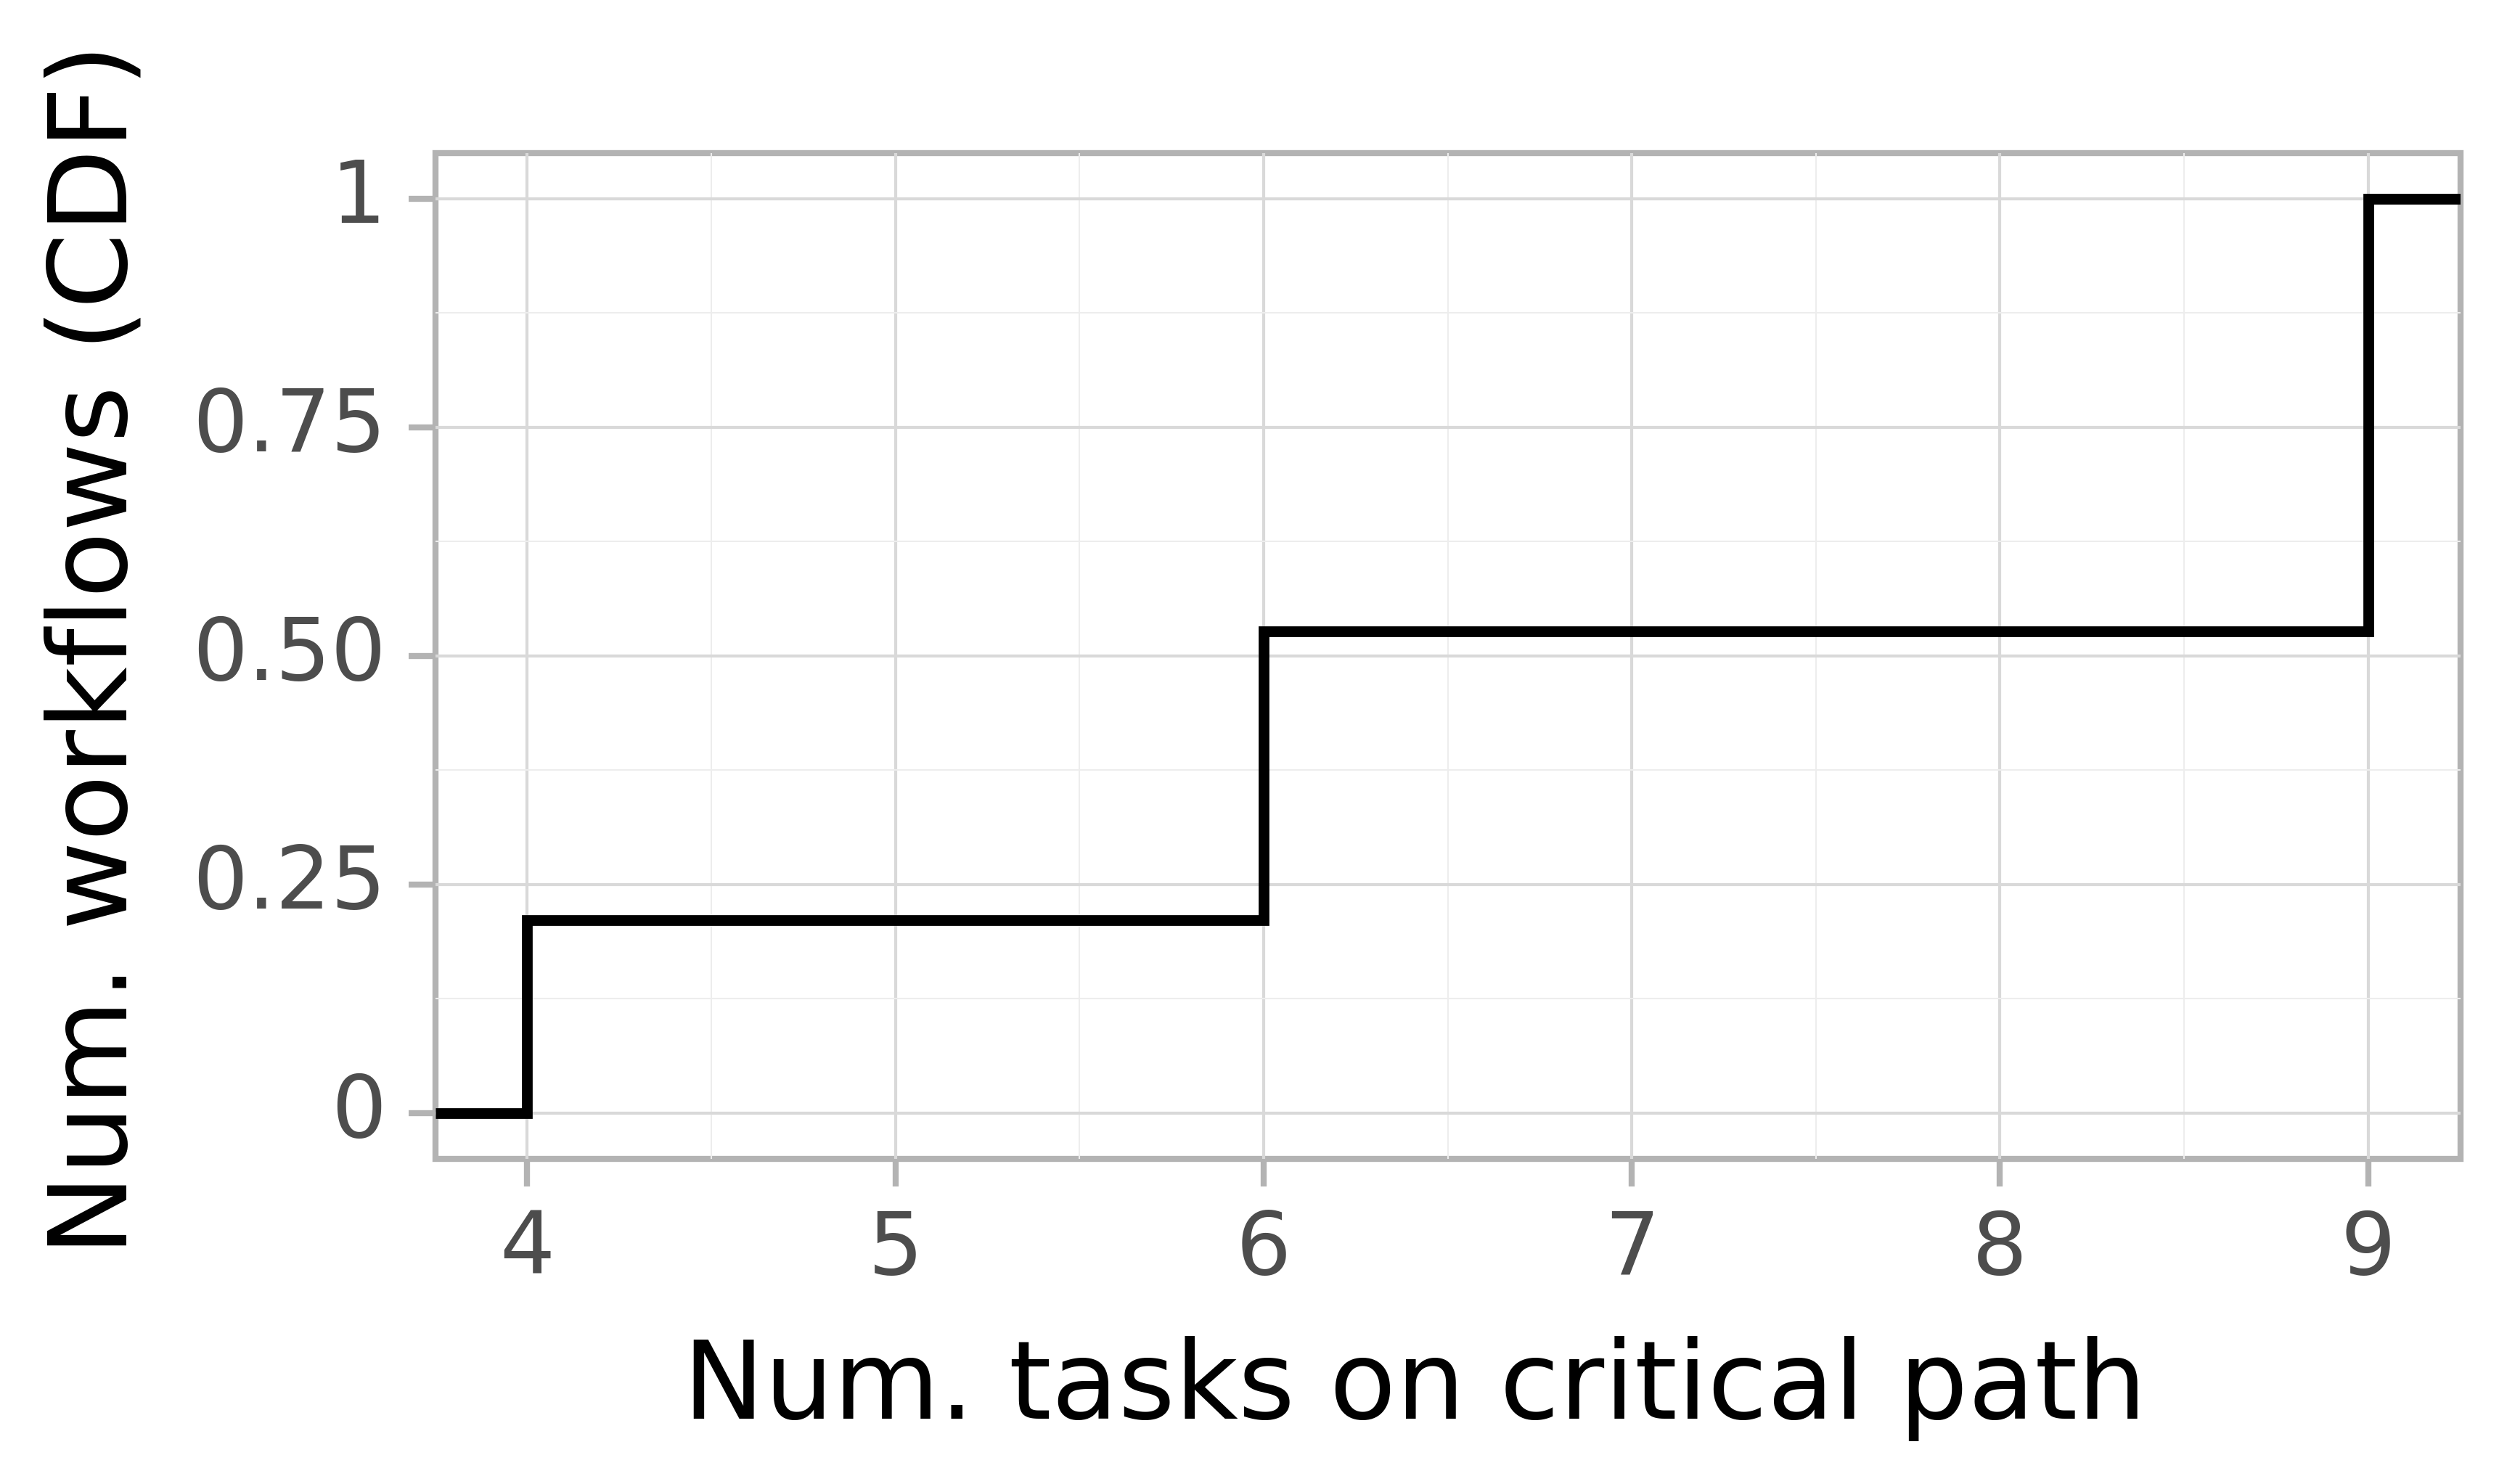 Job critical path task count graph for the spec_trace-1 trace.